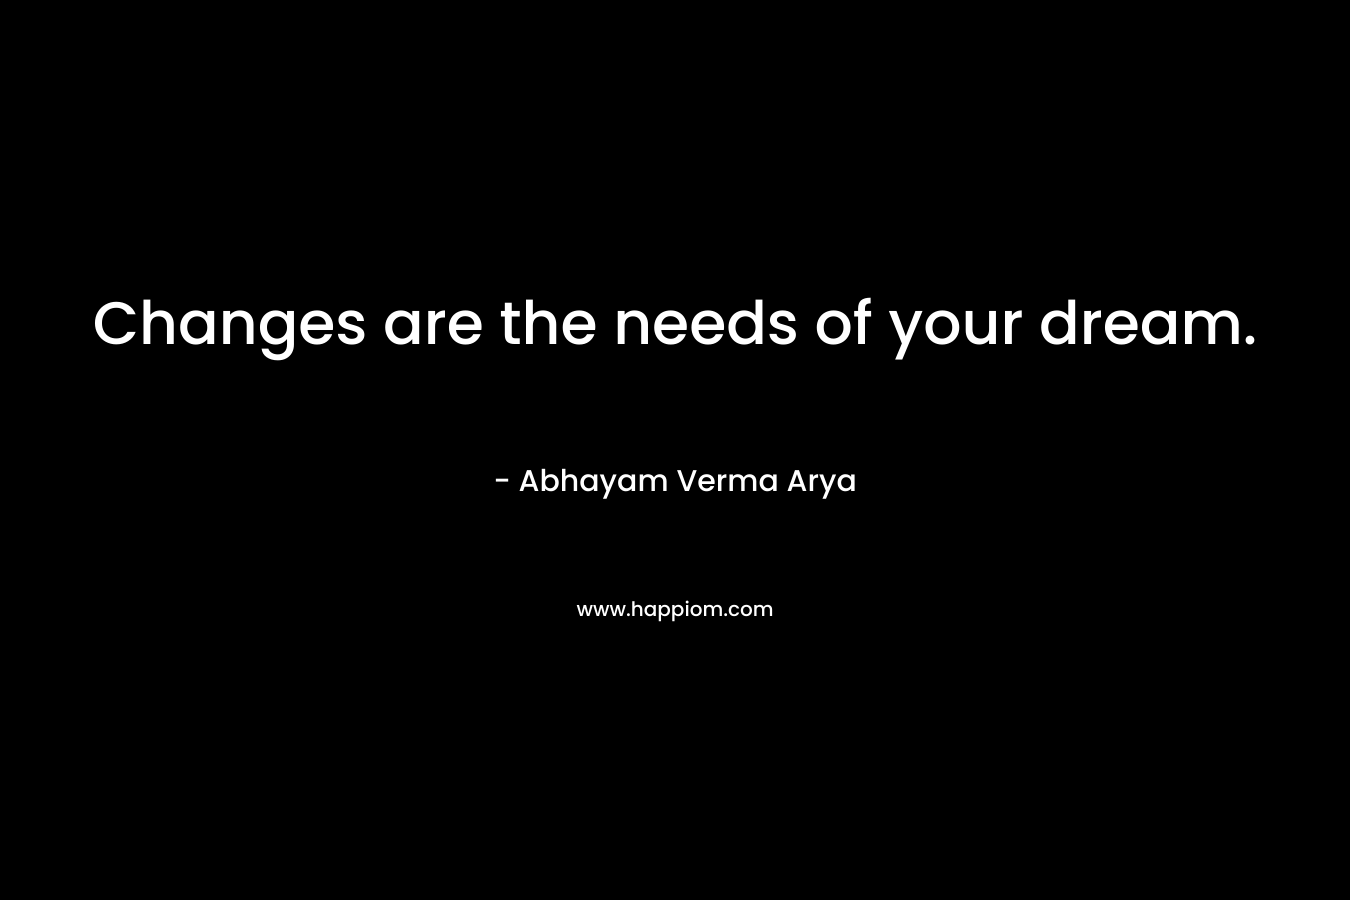 Changes are the needs of your dream.